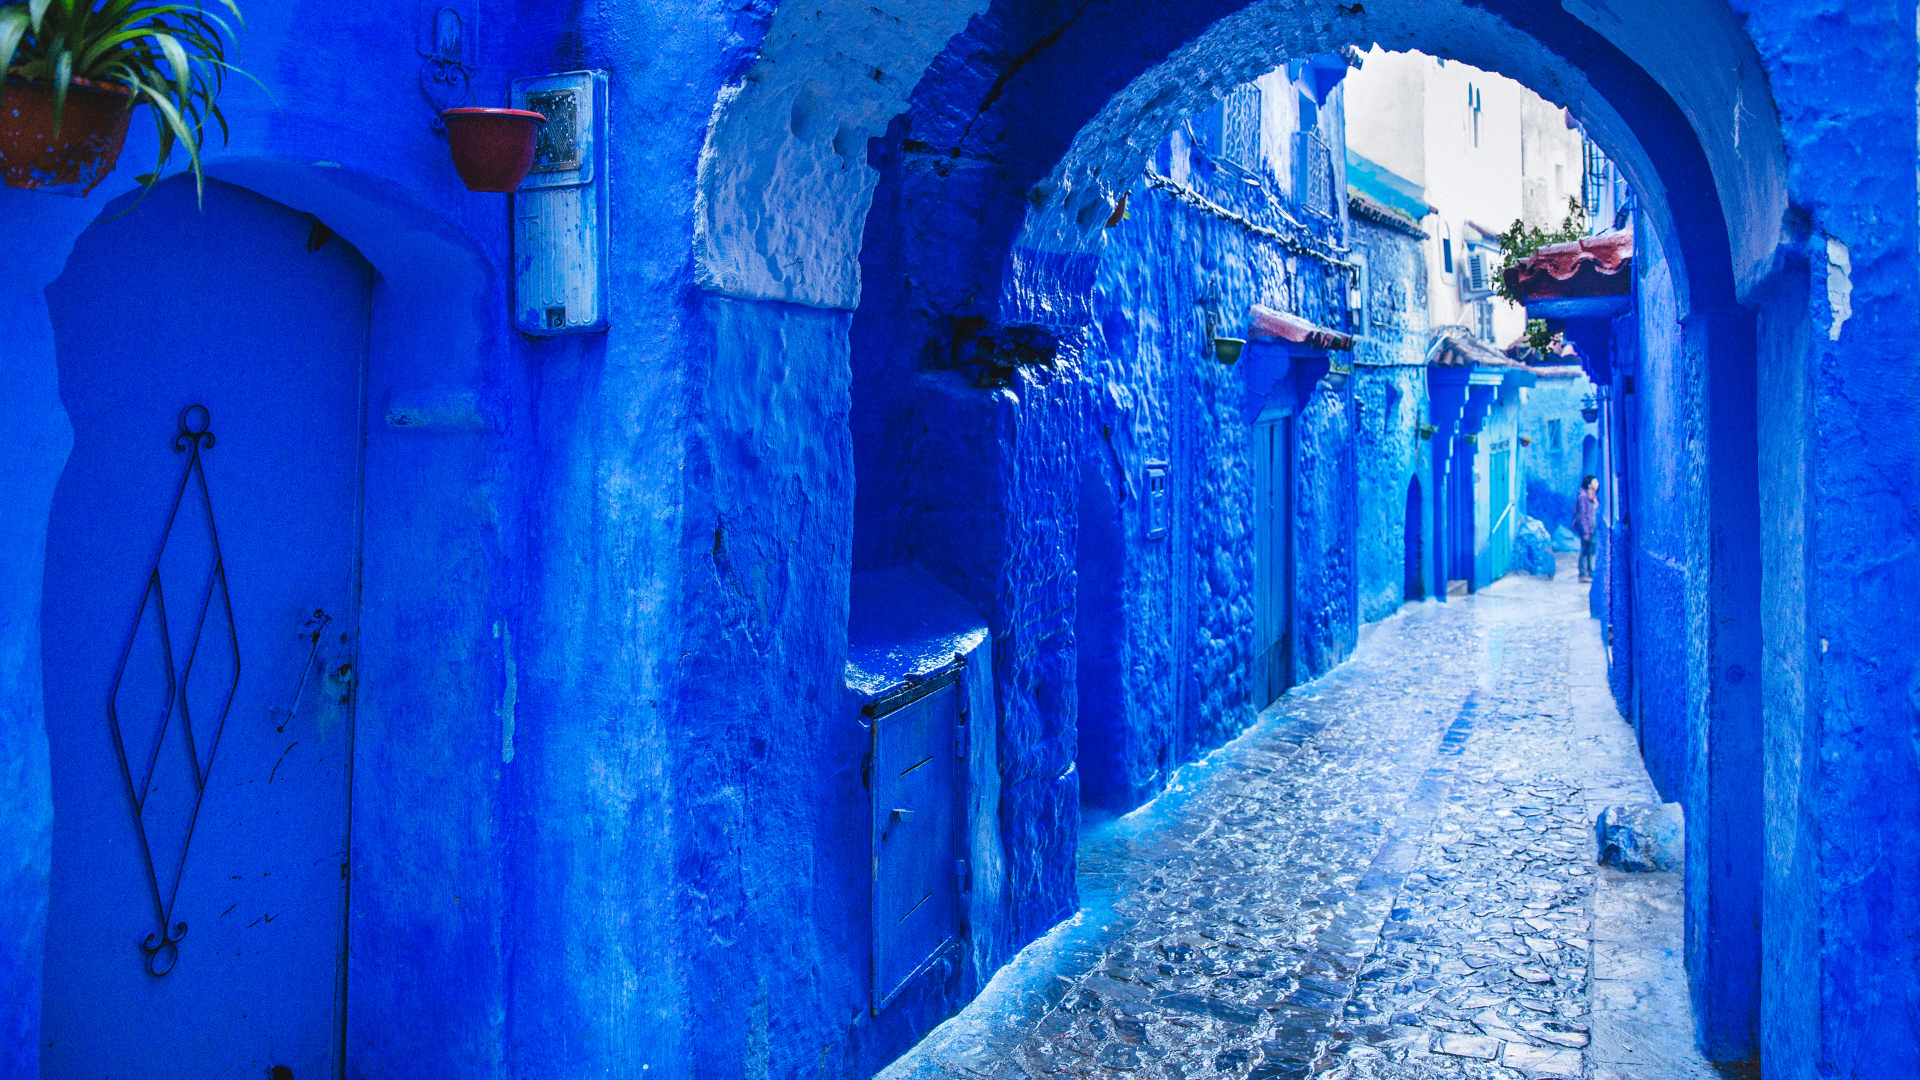 Chefchaouen, Morocco is one of the best photo-ops